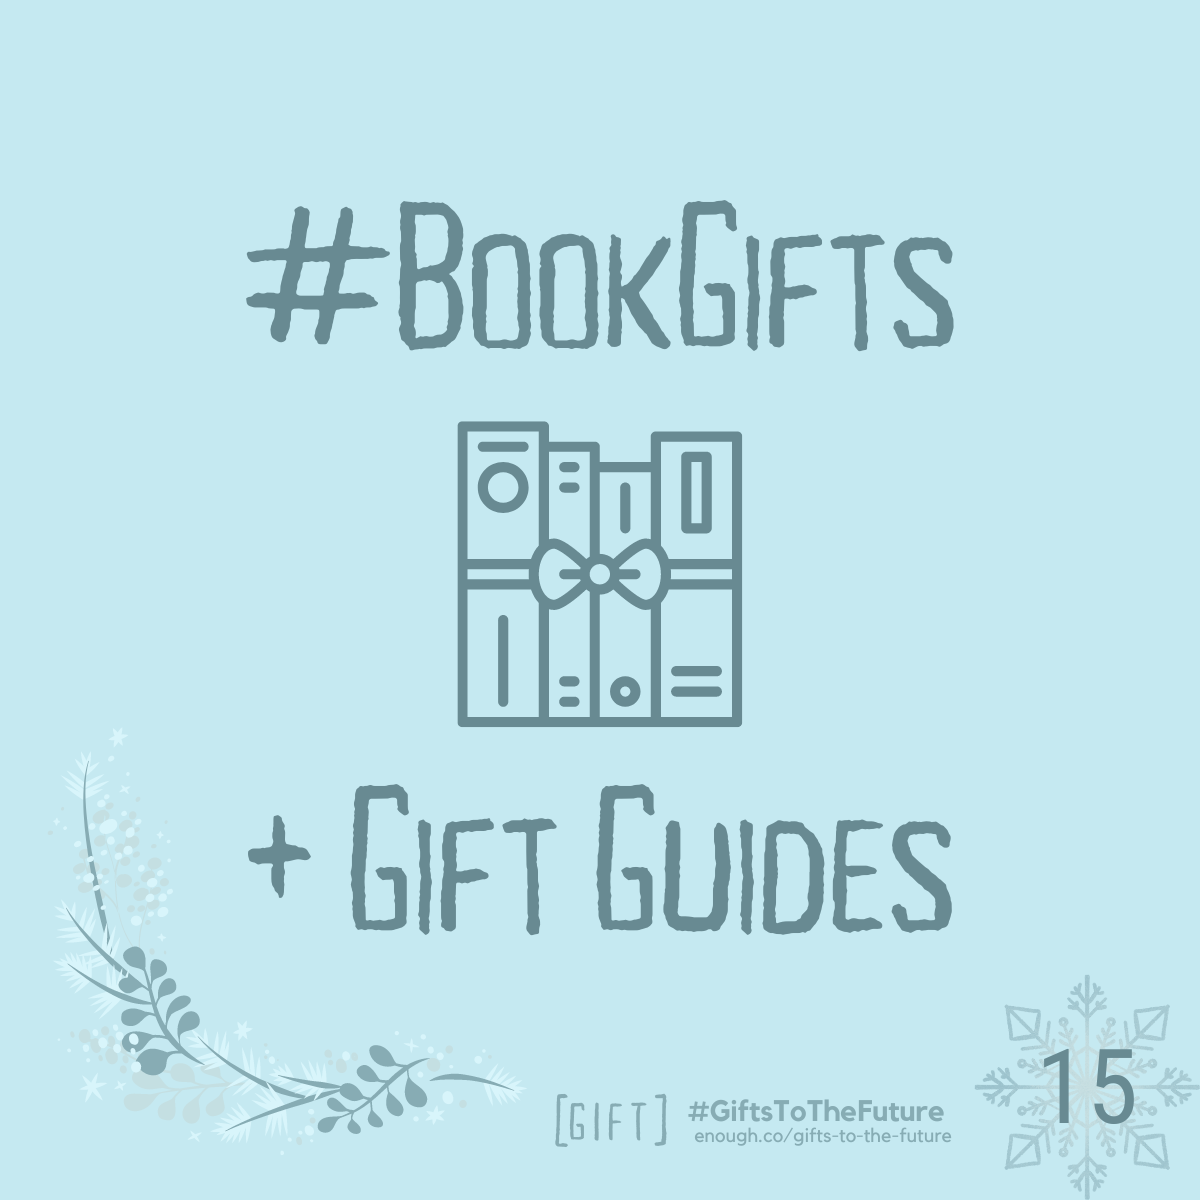 Wintry light blue background "#BookGifts + Gift Guides" Also "[GIFT] #GiftsToTheFuture enough.co/gifts-to-the-future 15"